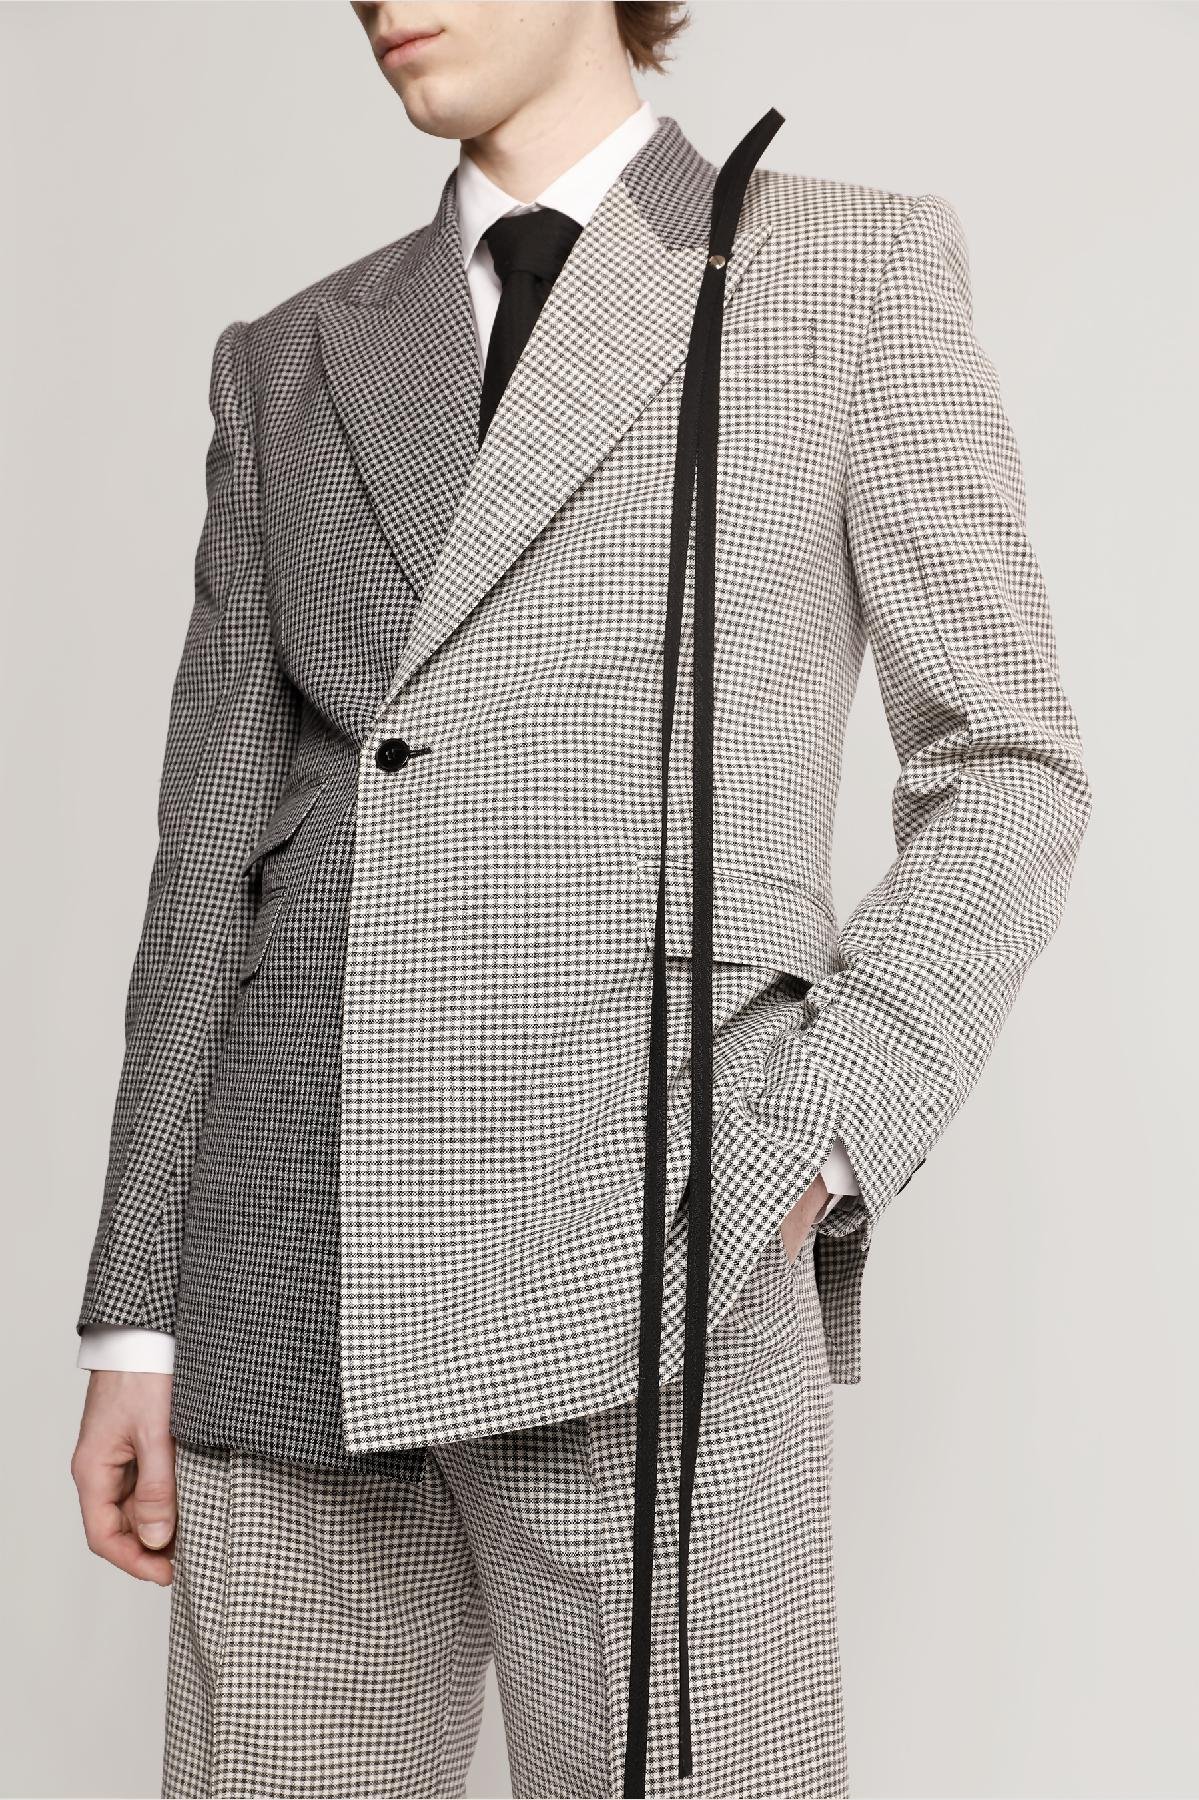 REGULAR-FITTED HOUNDSTOOTH WOOL DB JACKET WITH CONTRASTED FRONT by KYLE HO